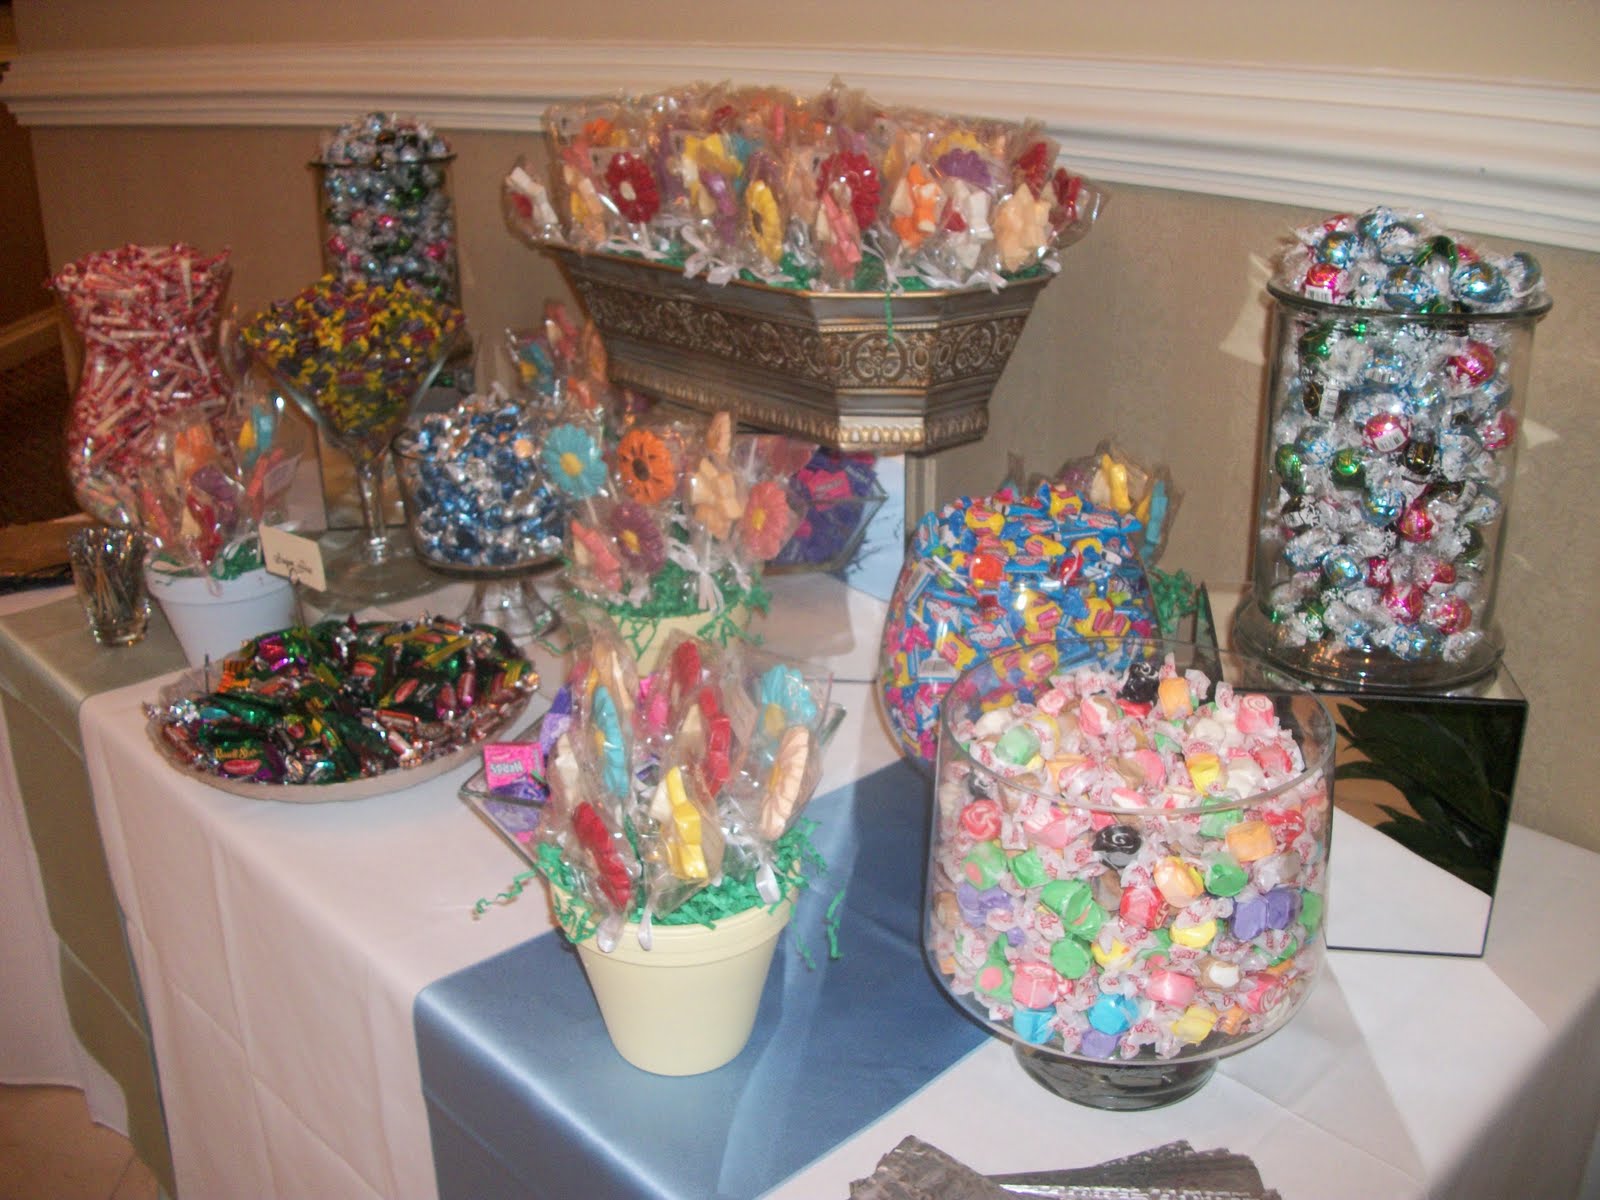 The addition of the candy bar